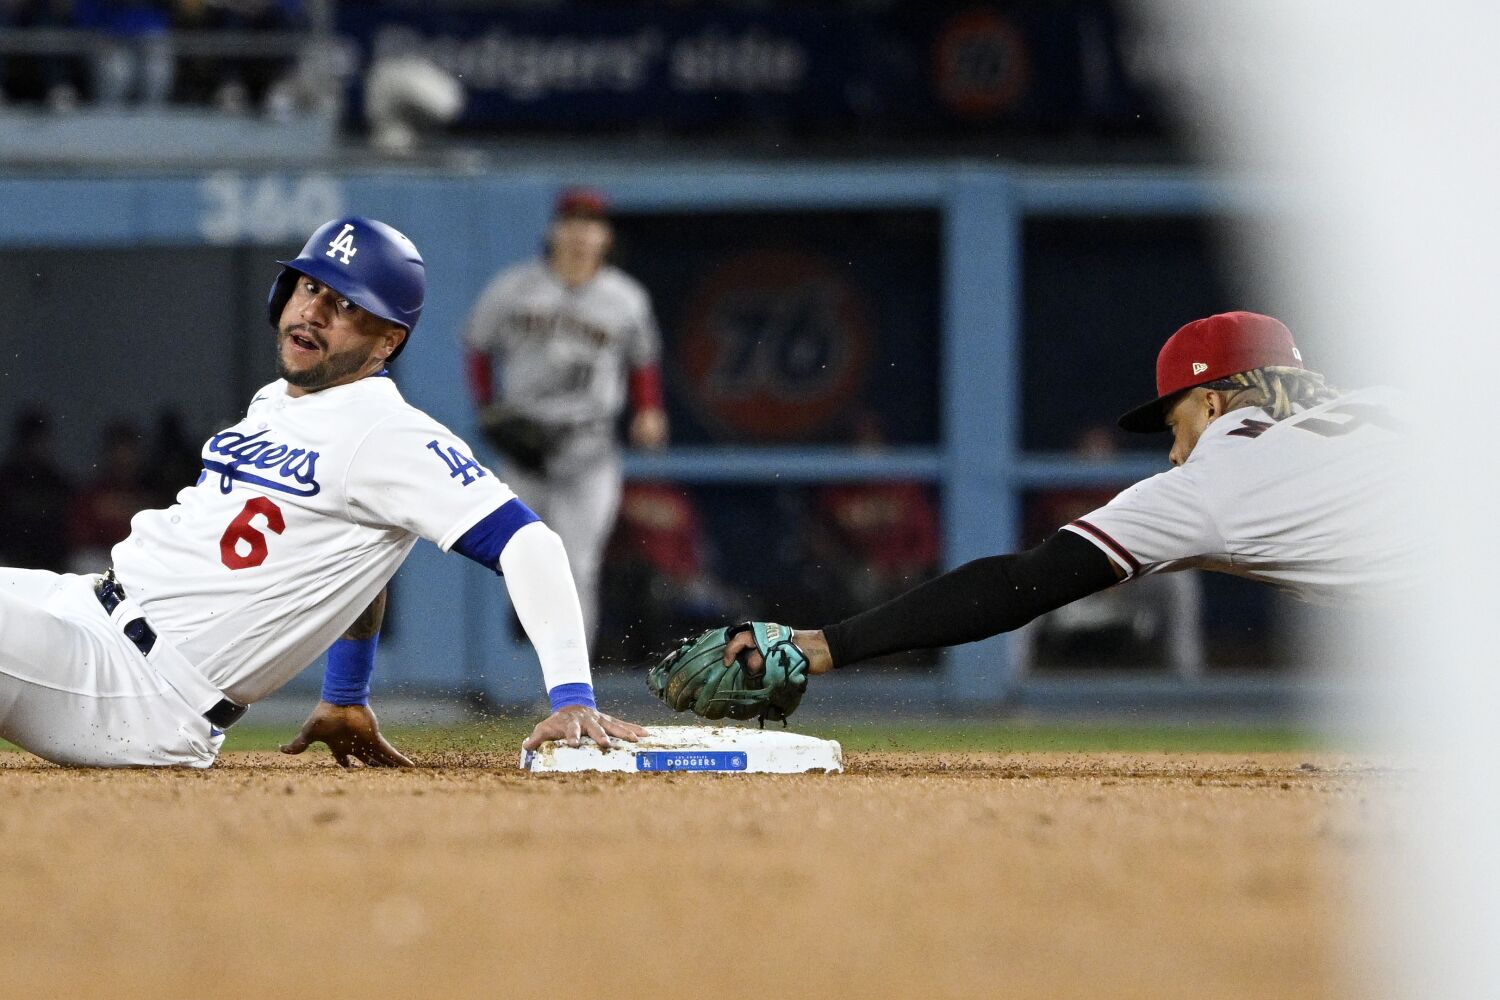 Squandered scoring chances take a toll on Dodgers in loss to Diamondbacks